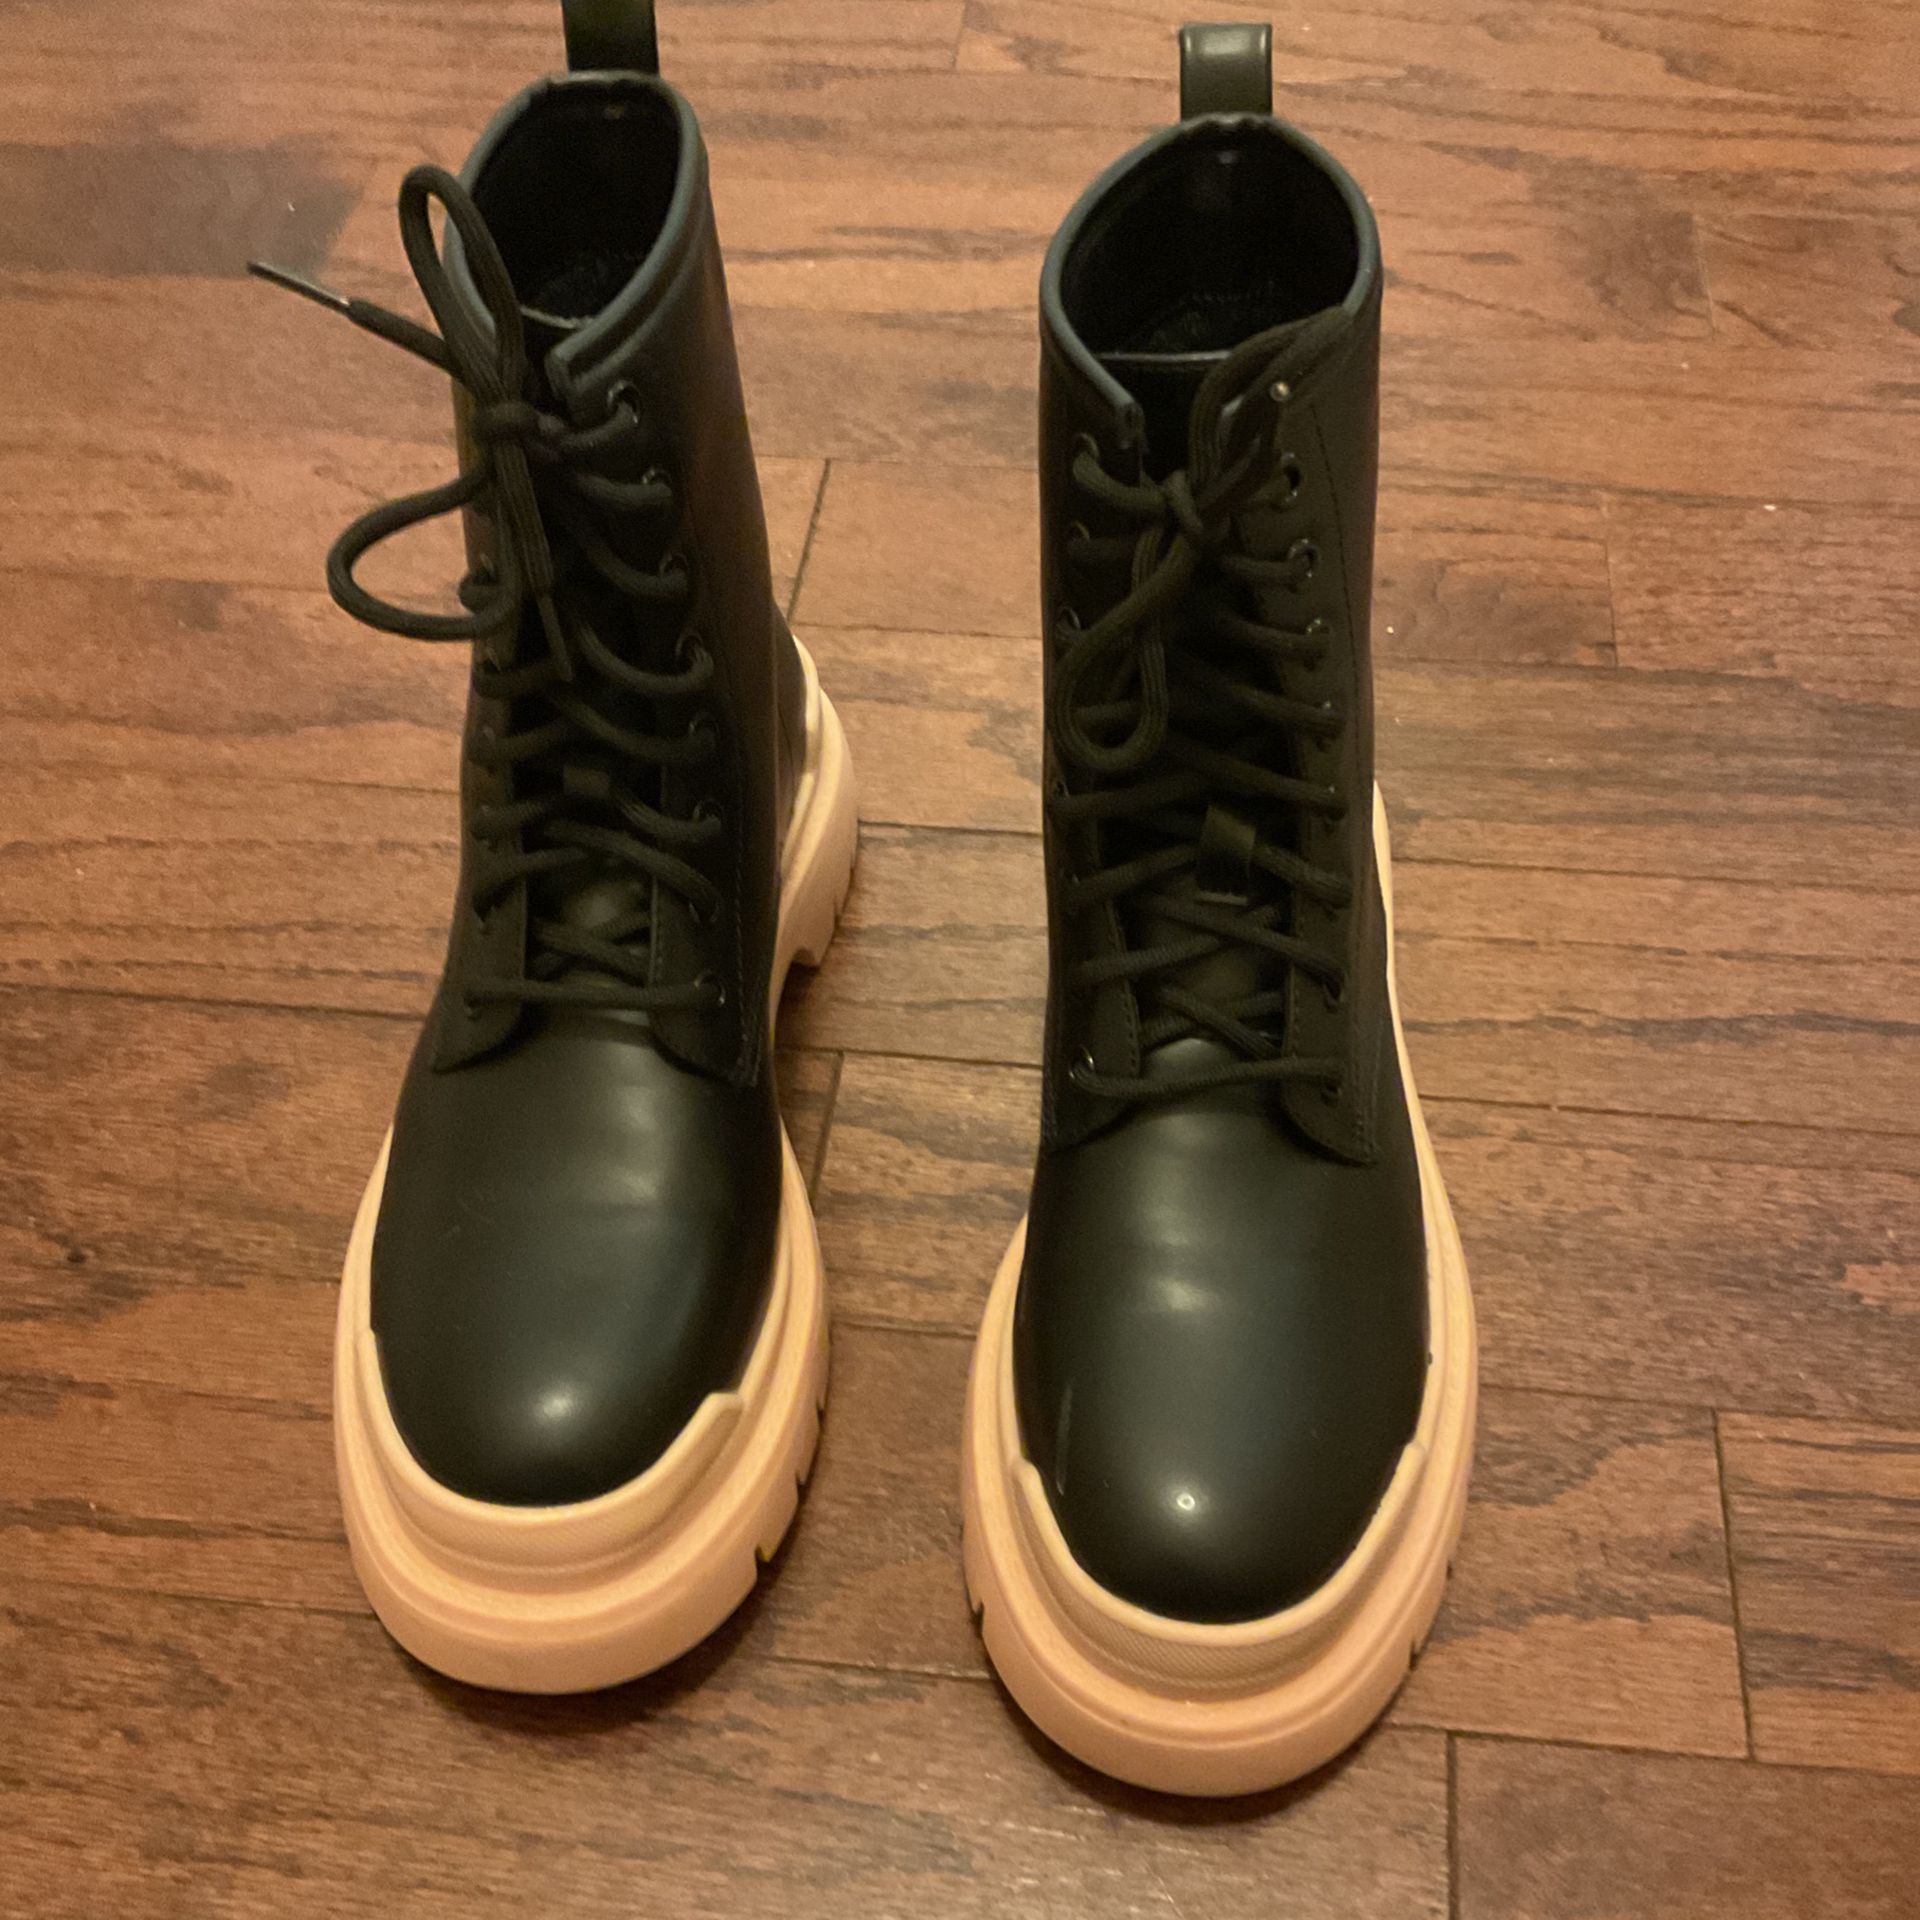 black/pink  combat boots with lace up strings